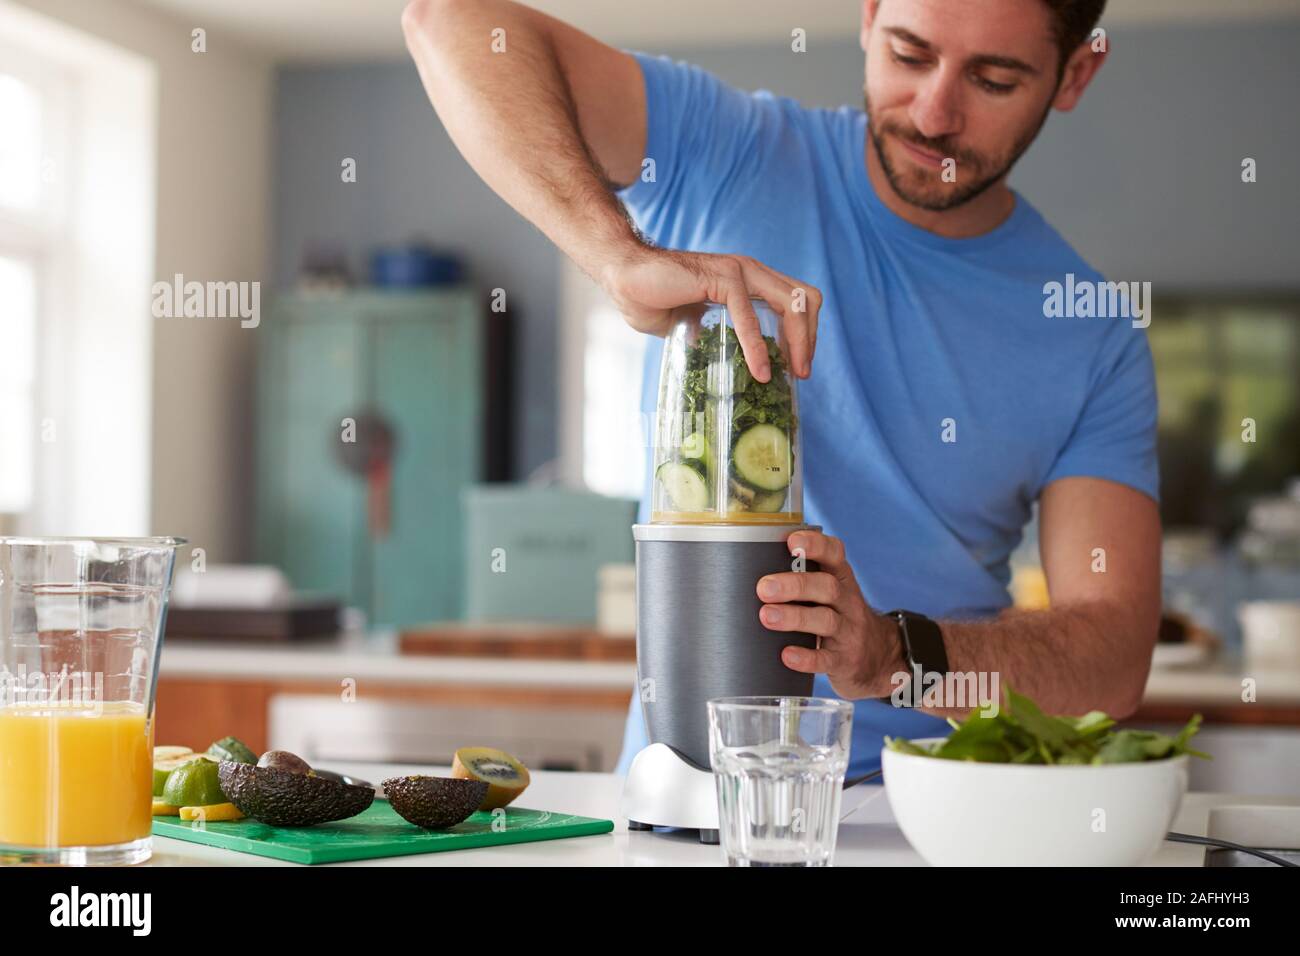 Man Making Healthy Juice Drink With Fresh Ingredients In Electric Juicer After Exercise Stock Photo